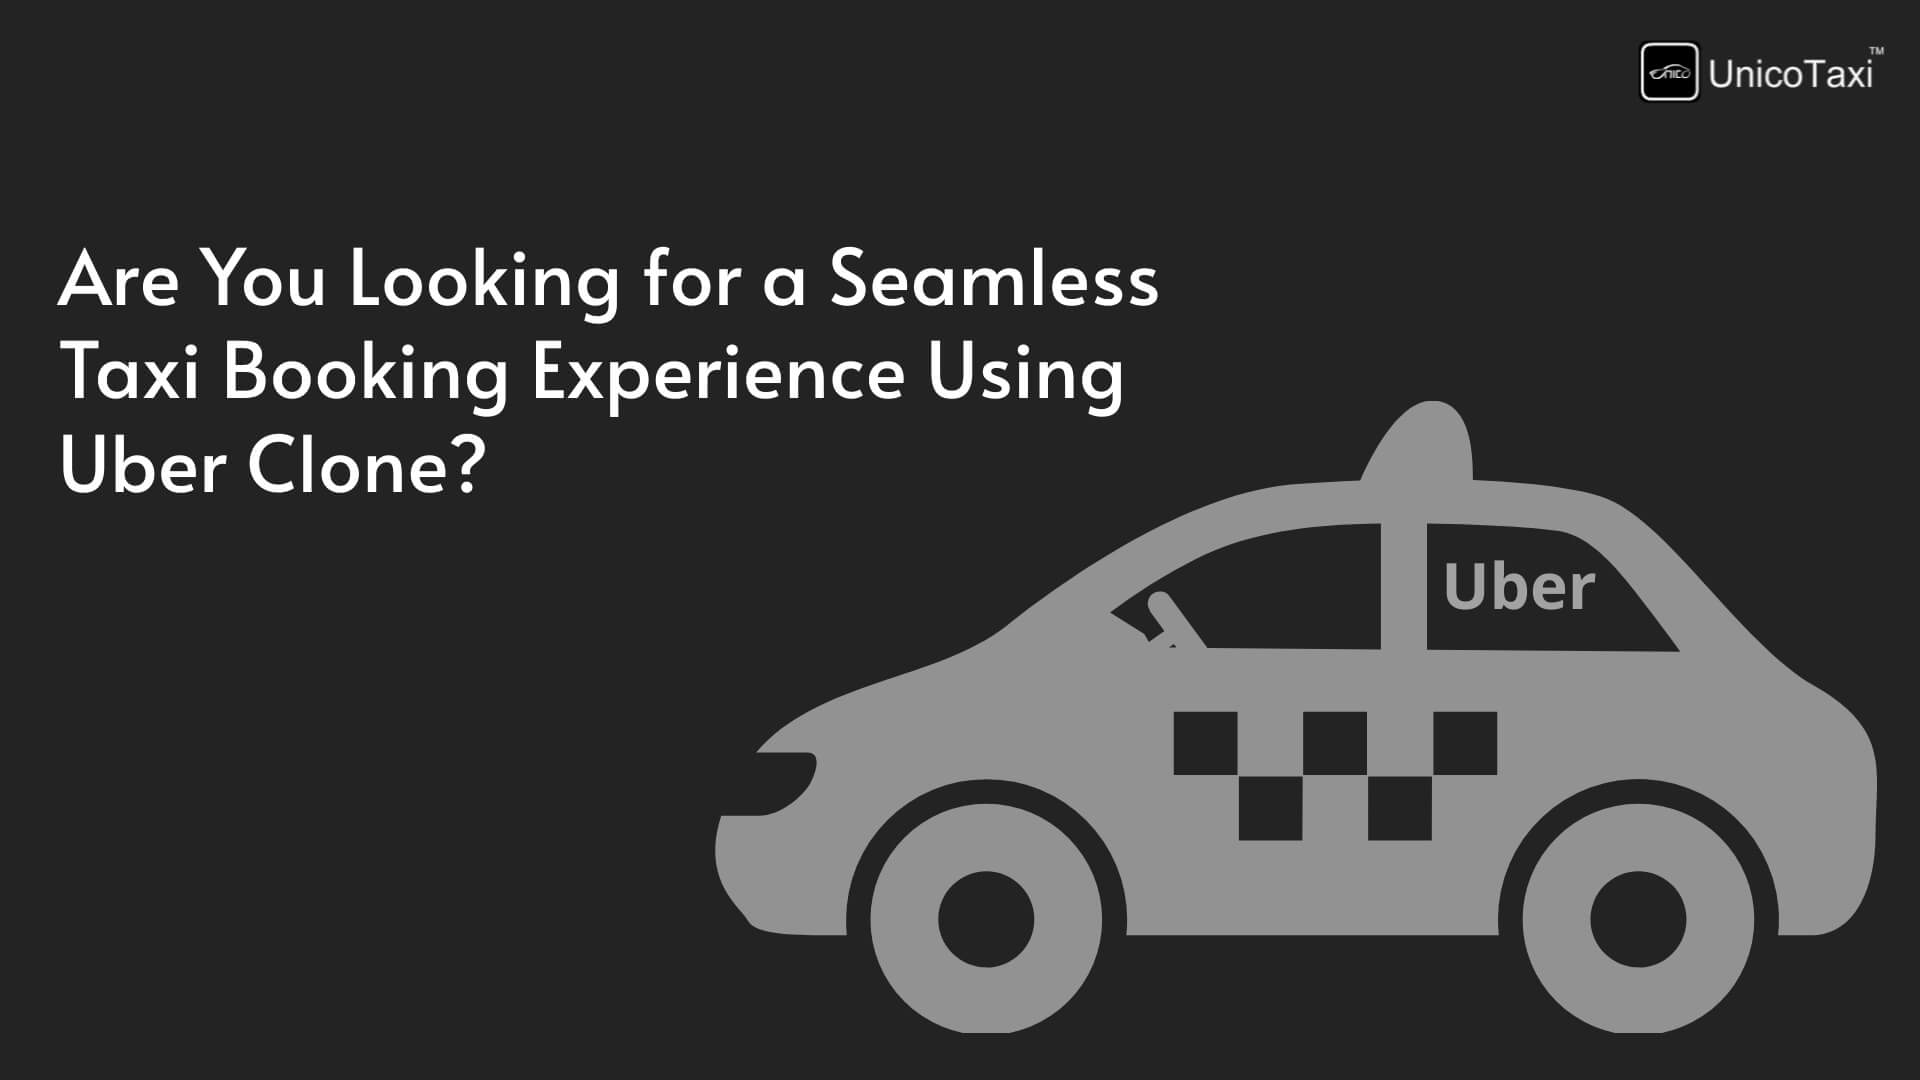 Are You Looking for a Seamless Taxi Booking Experience Using Uber Clone?